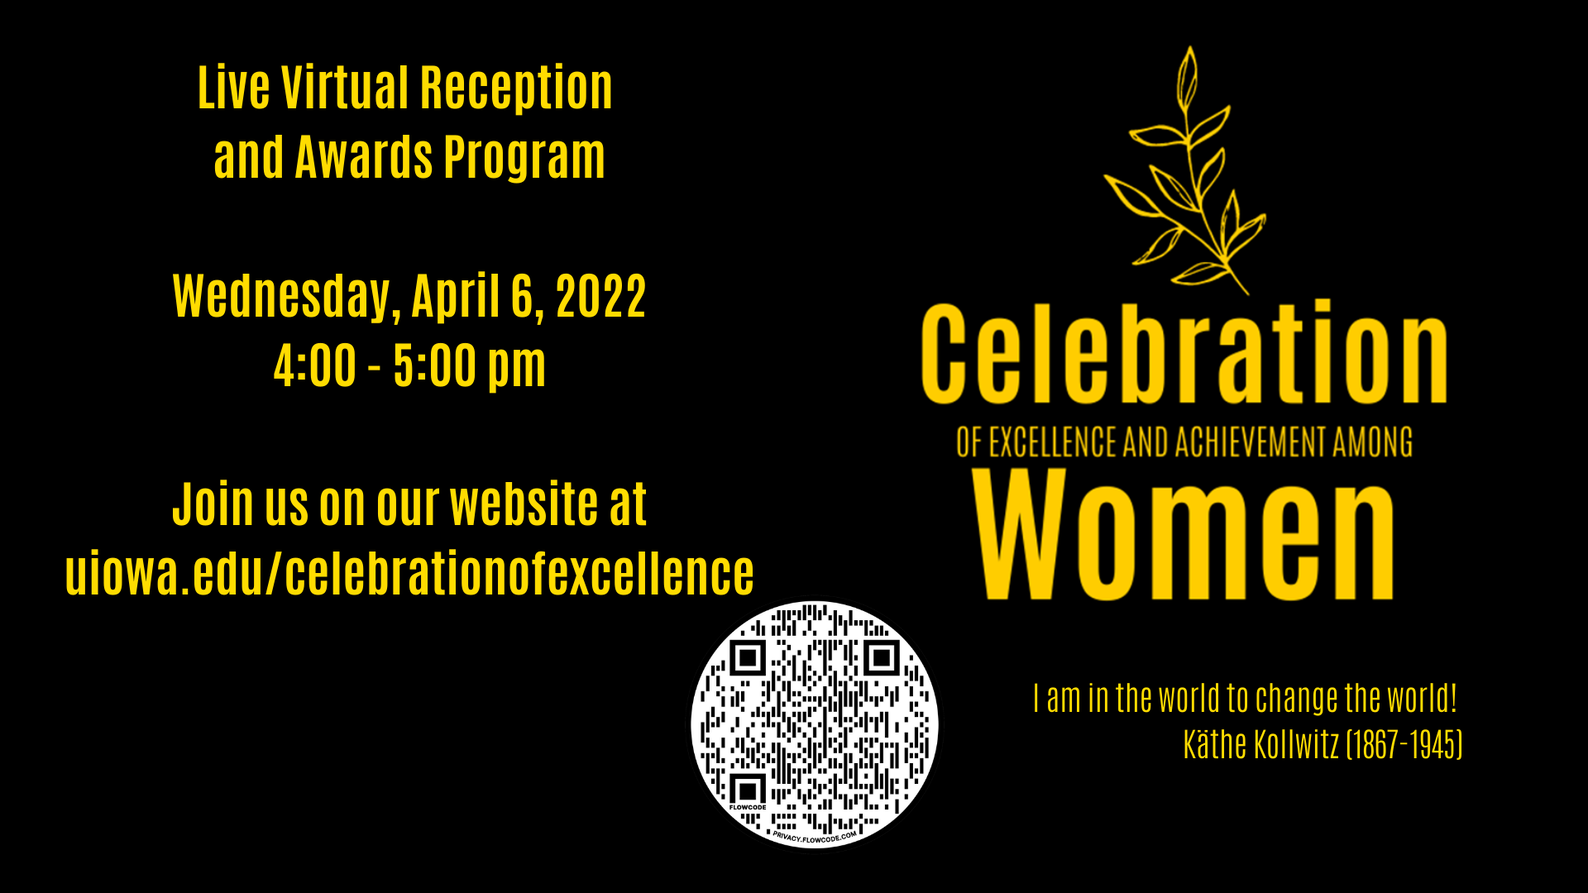 Celebration of Excellence and Achievement Among Women